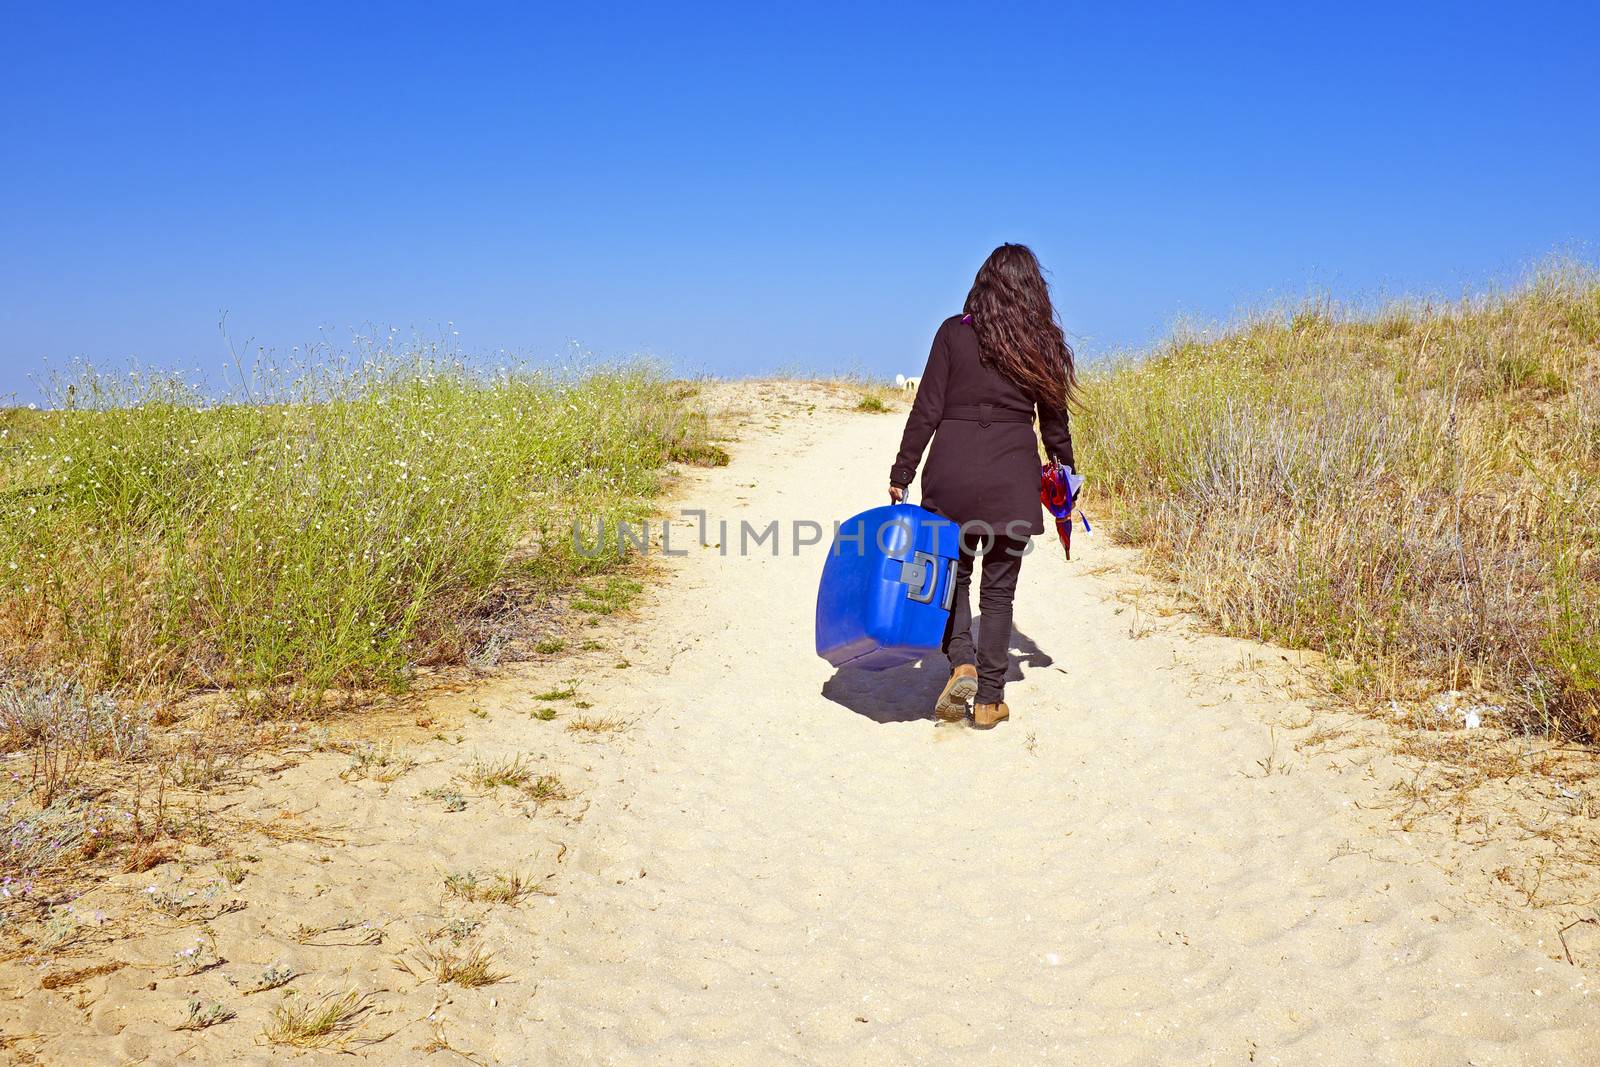 Young woman travelling to her holidays destination